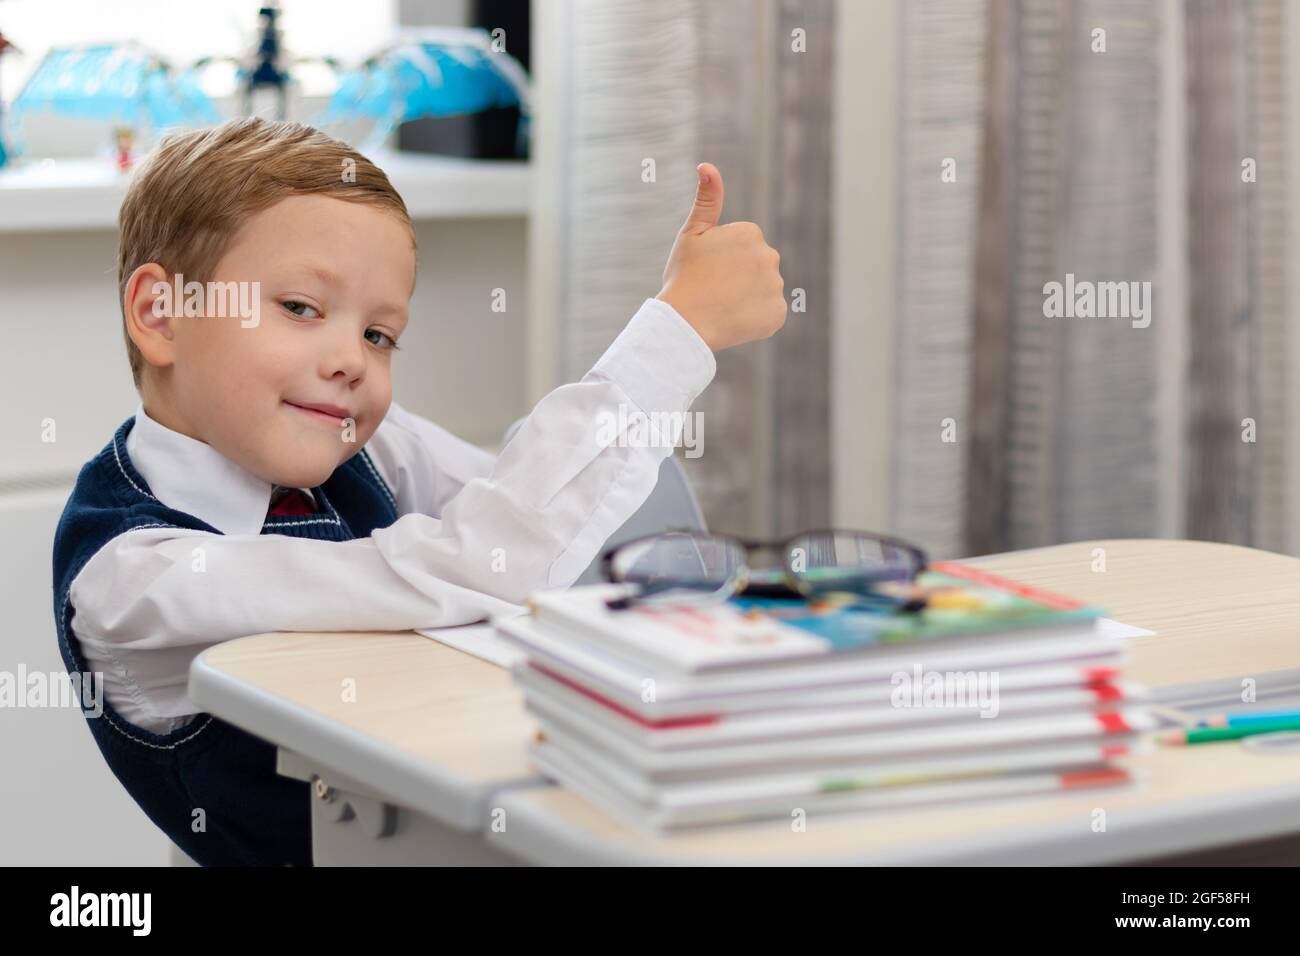 Cute boy first grader in school uniform at home during a break fooling around while sitting at his desk. Selective focus. Close-up. Portrait Stock Photo